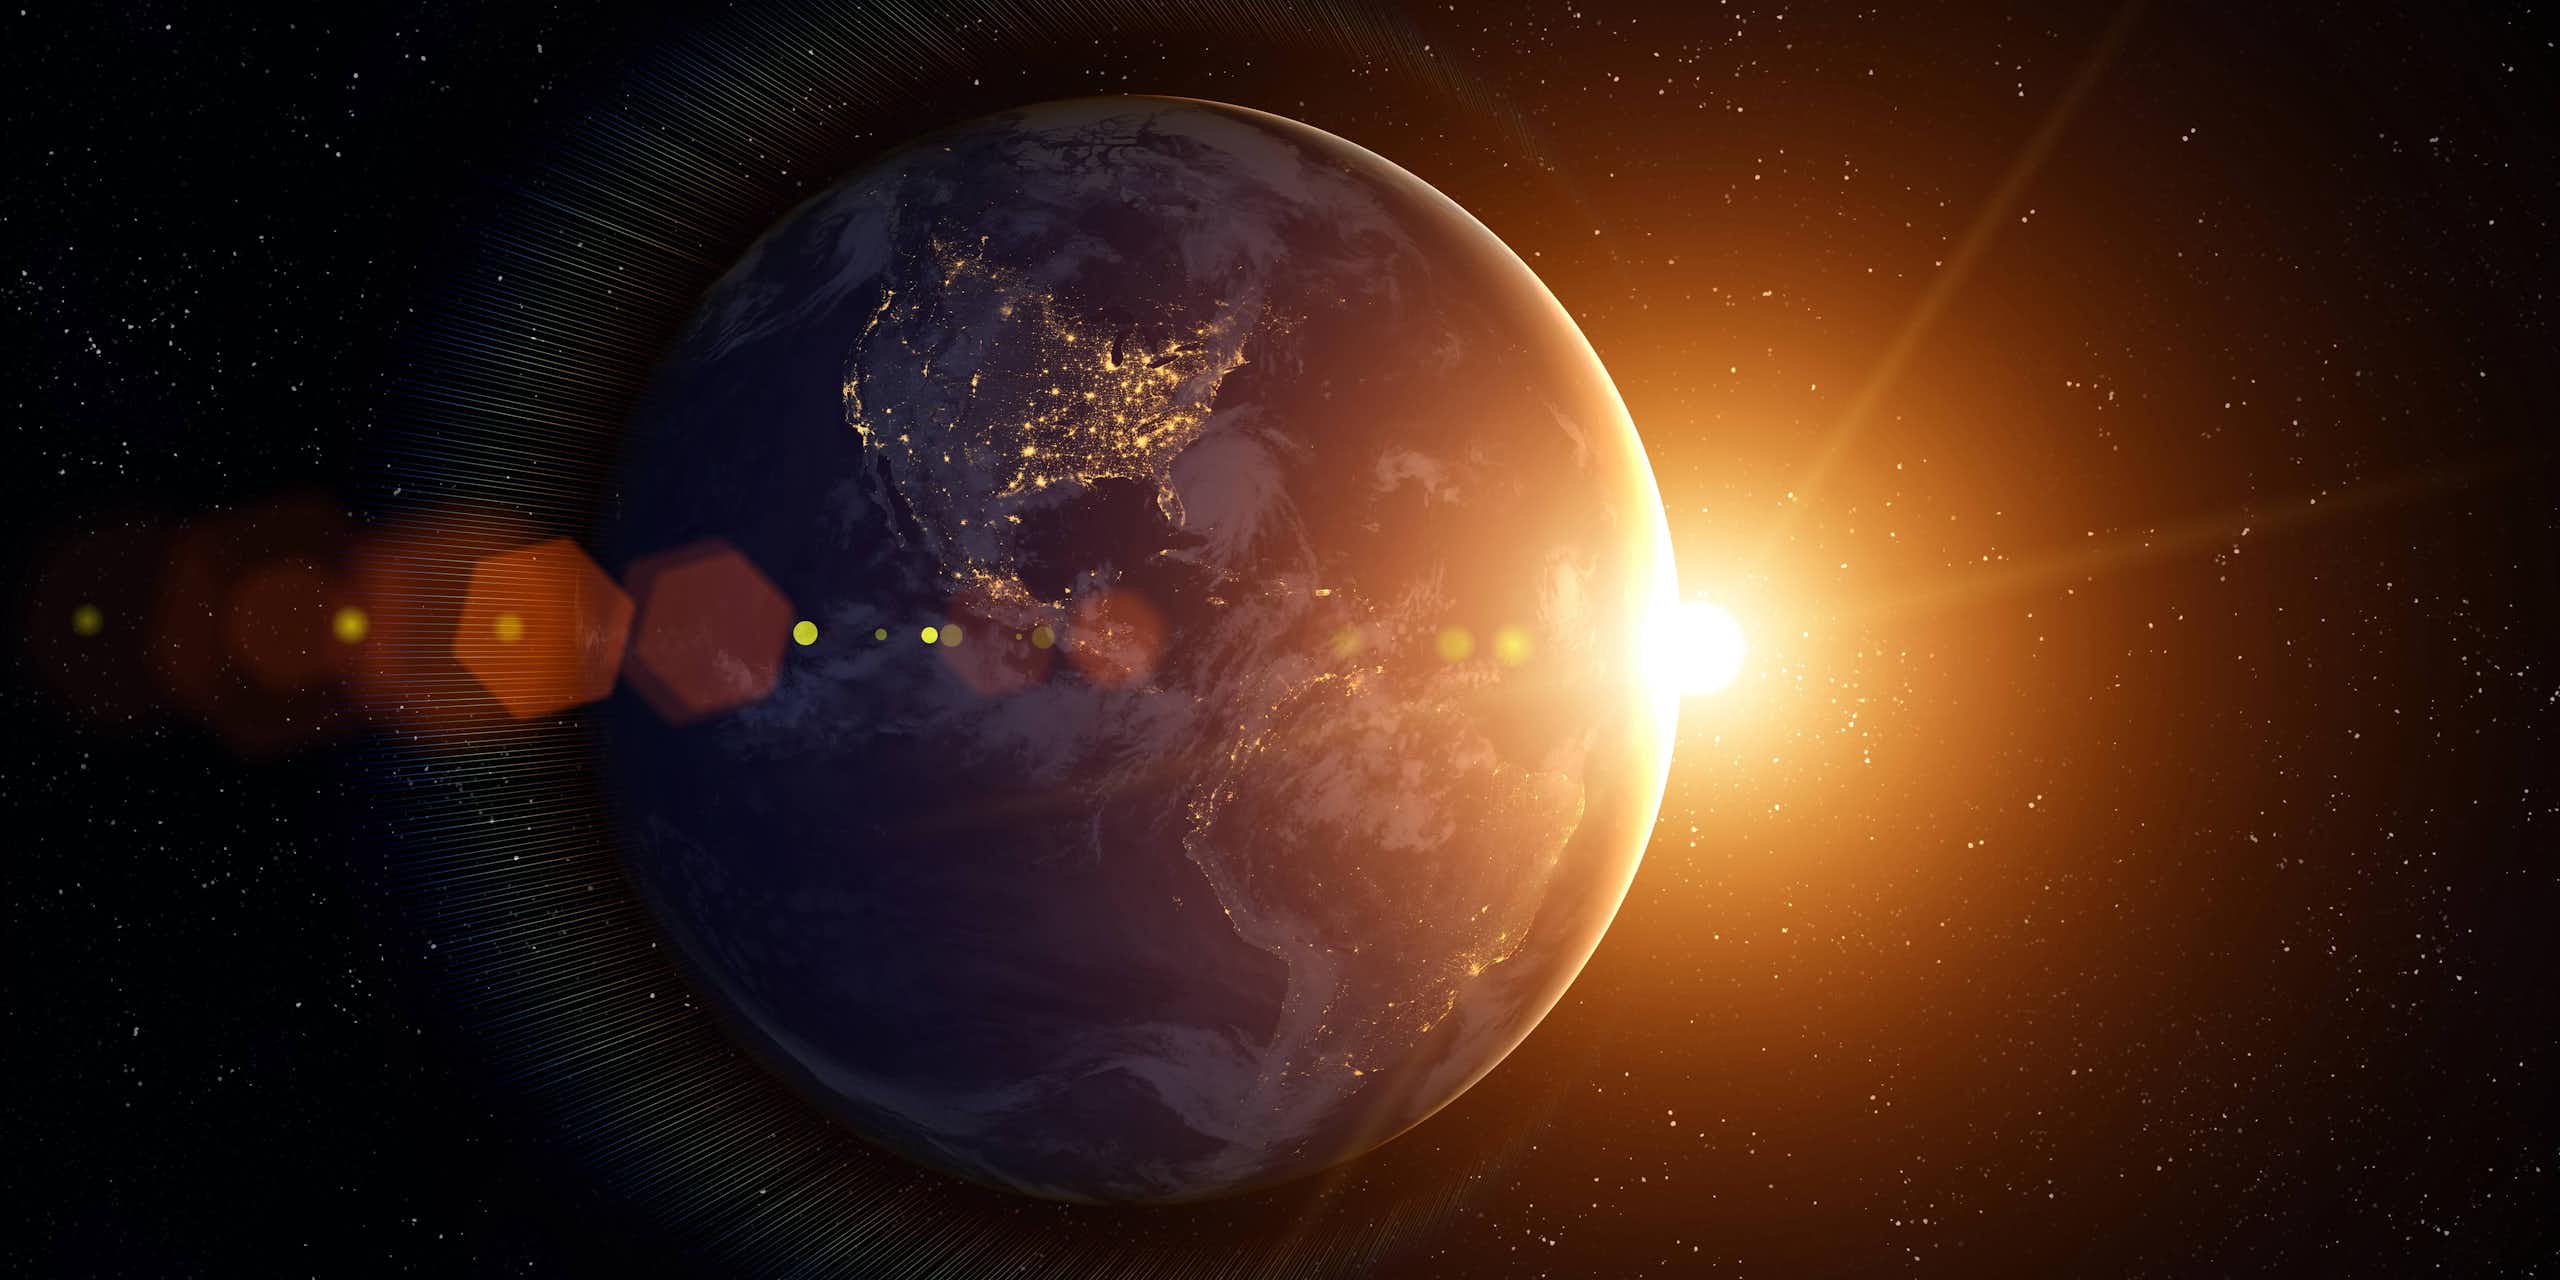 Image showing Earth floating in space with the Sun in the background.